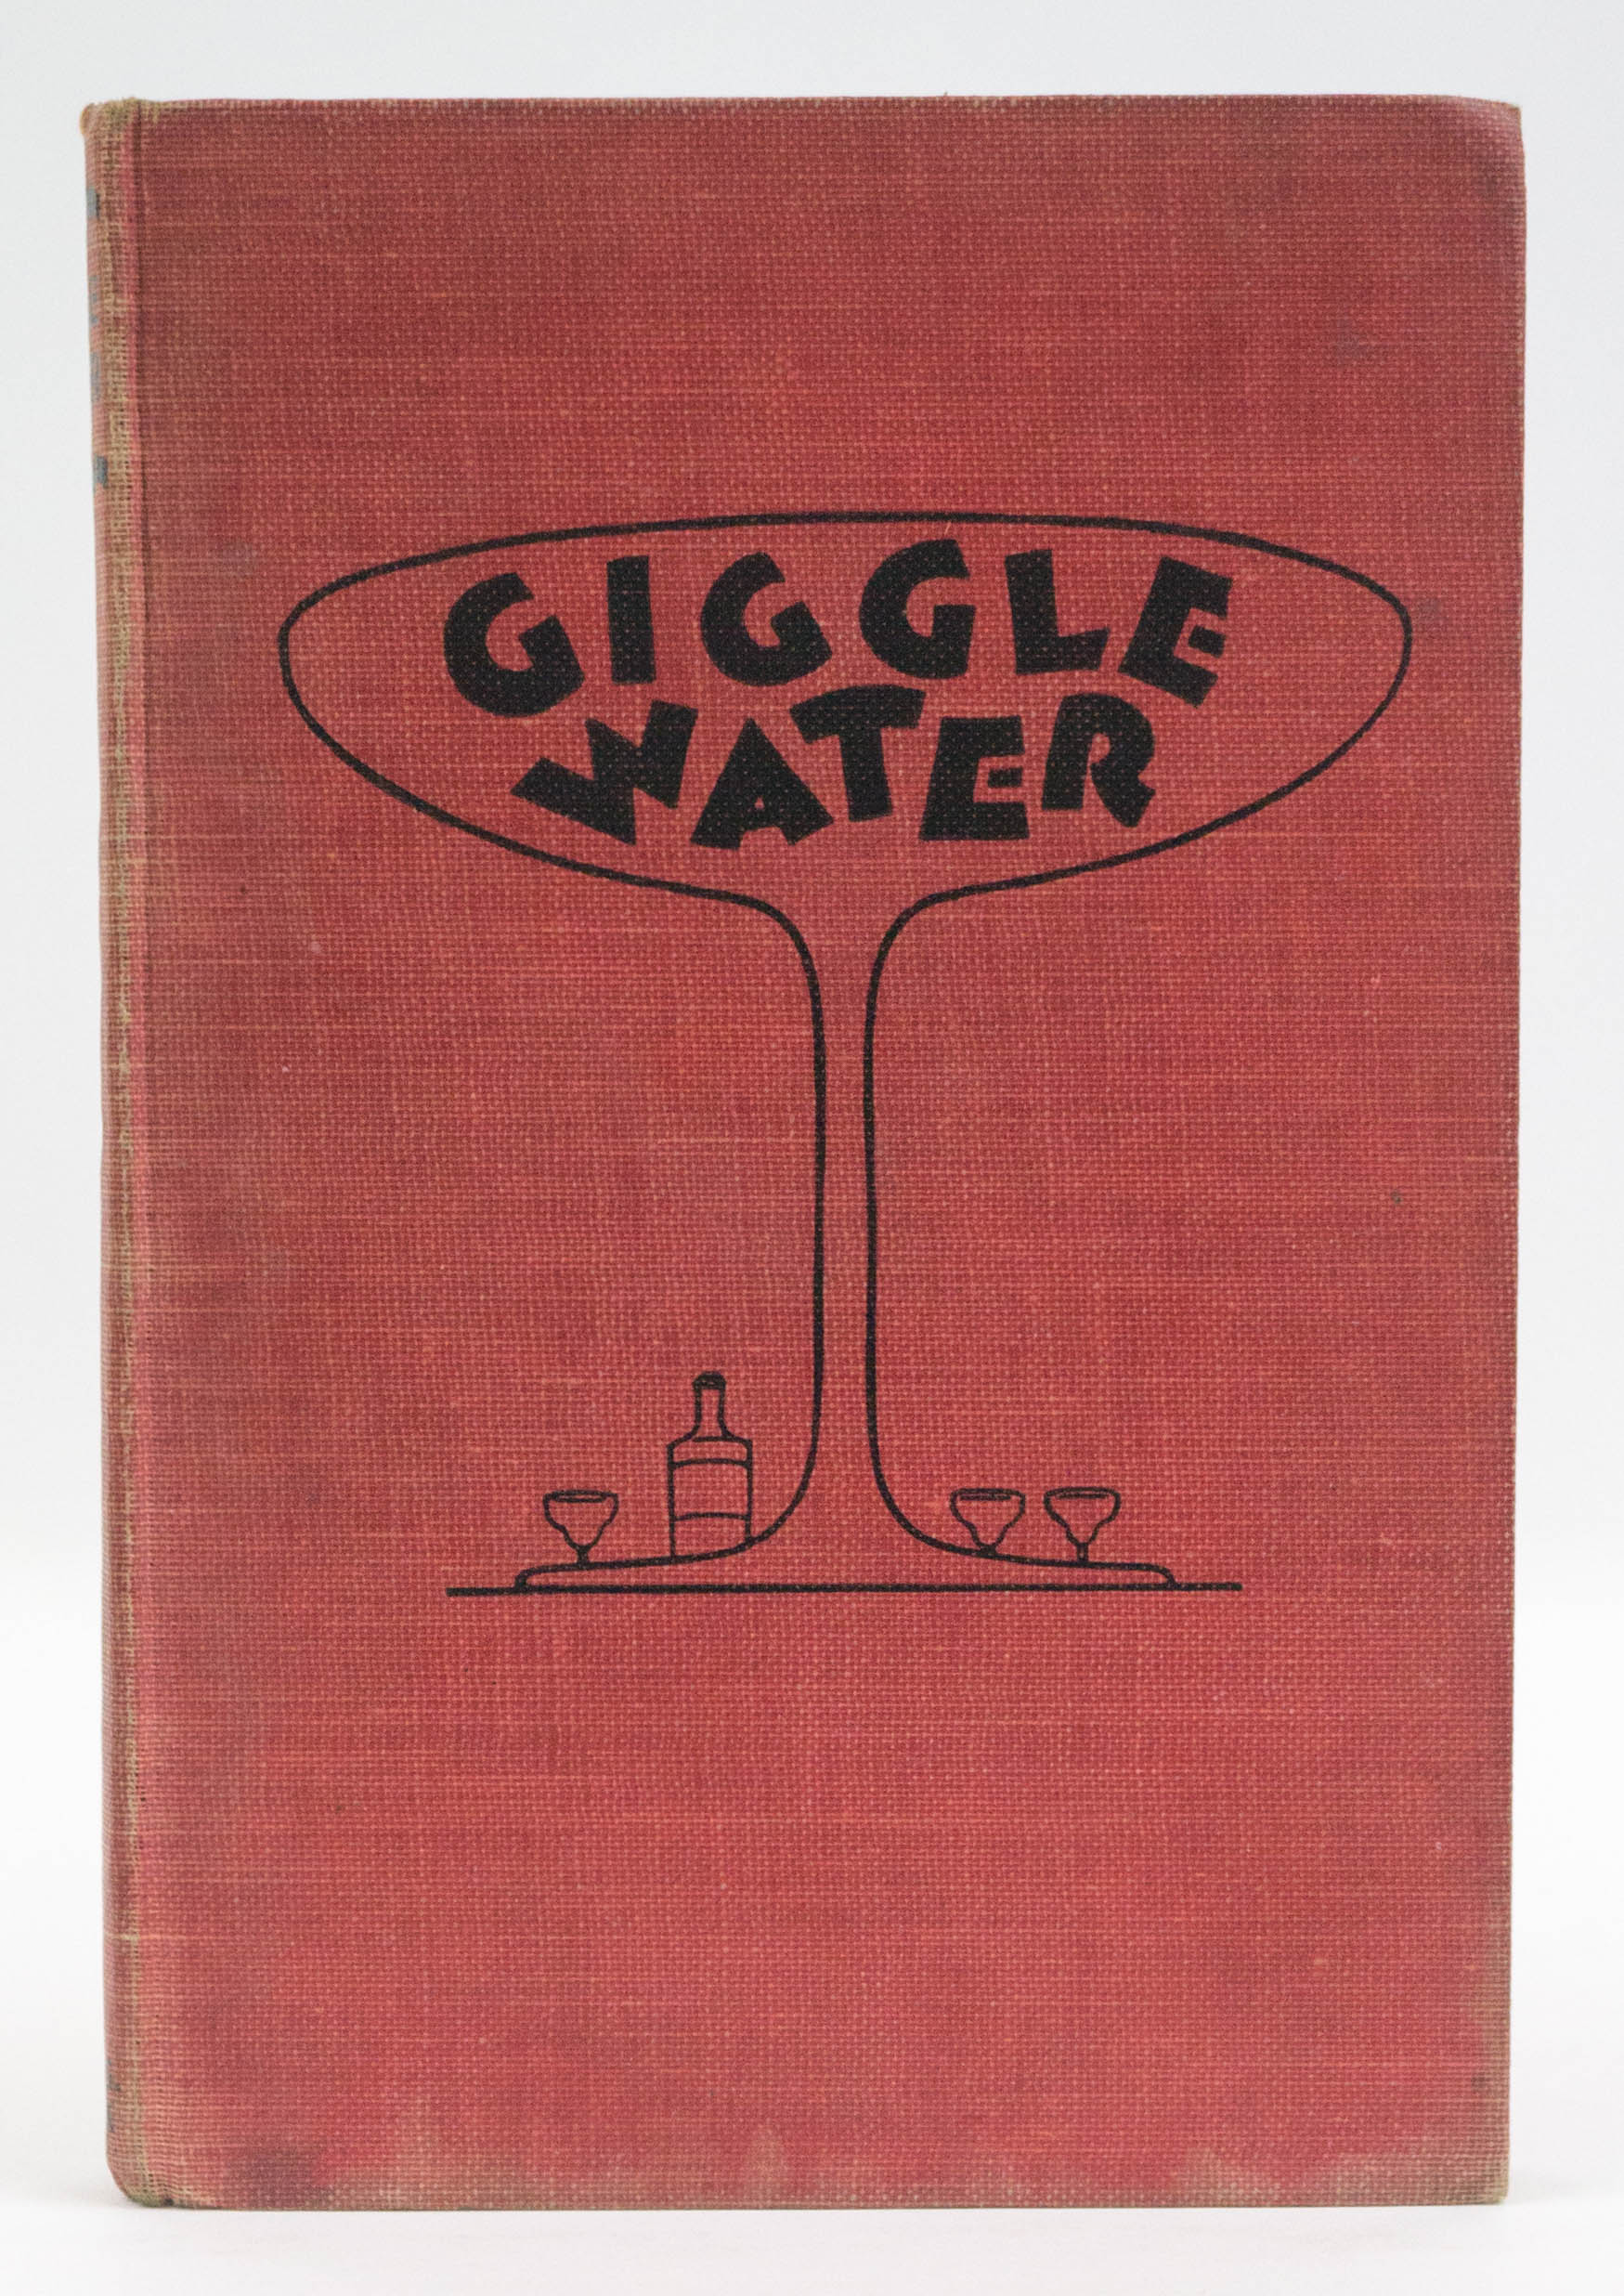 Giggle Water by Charles S. Warnock 1928 Edition